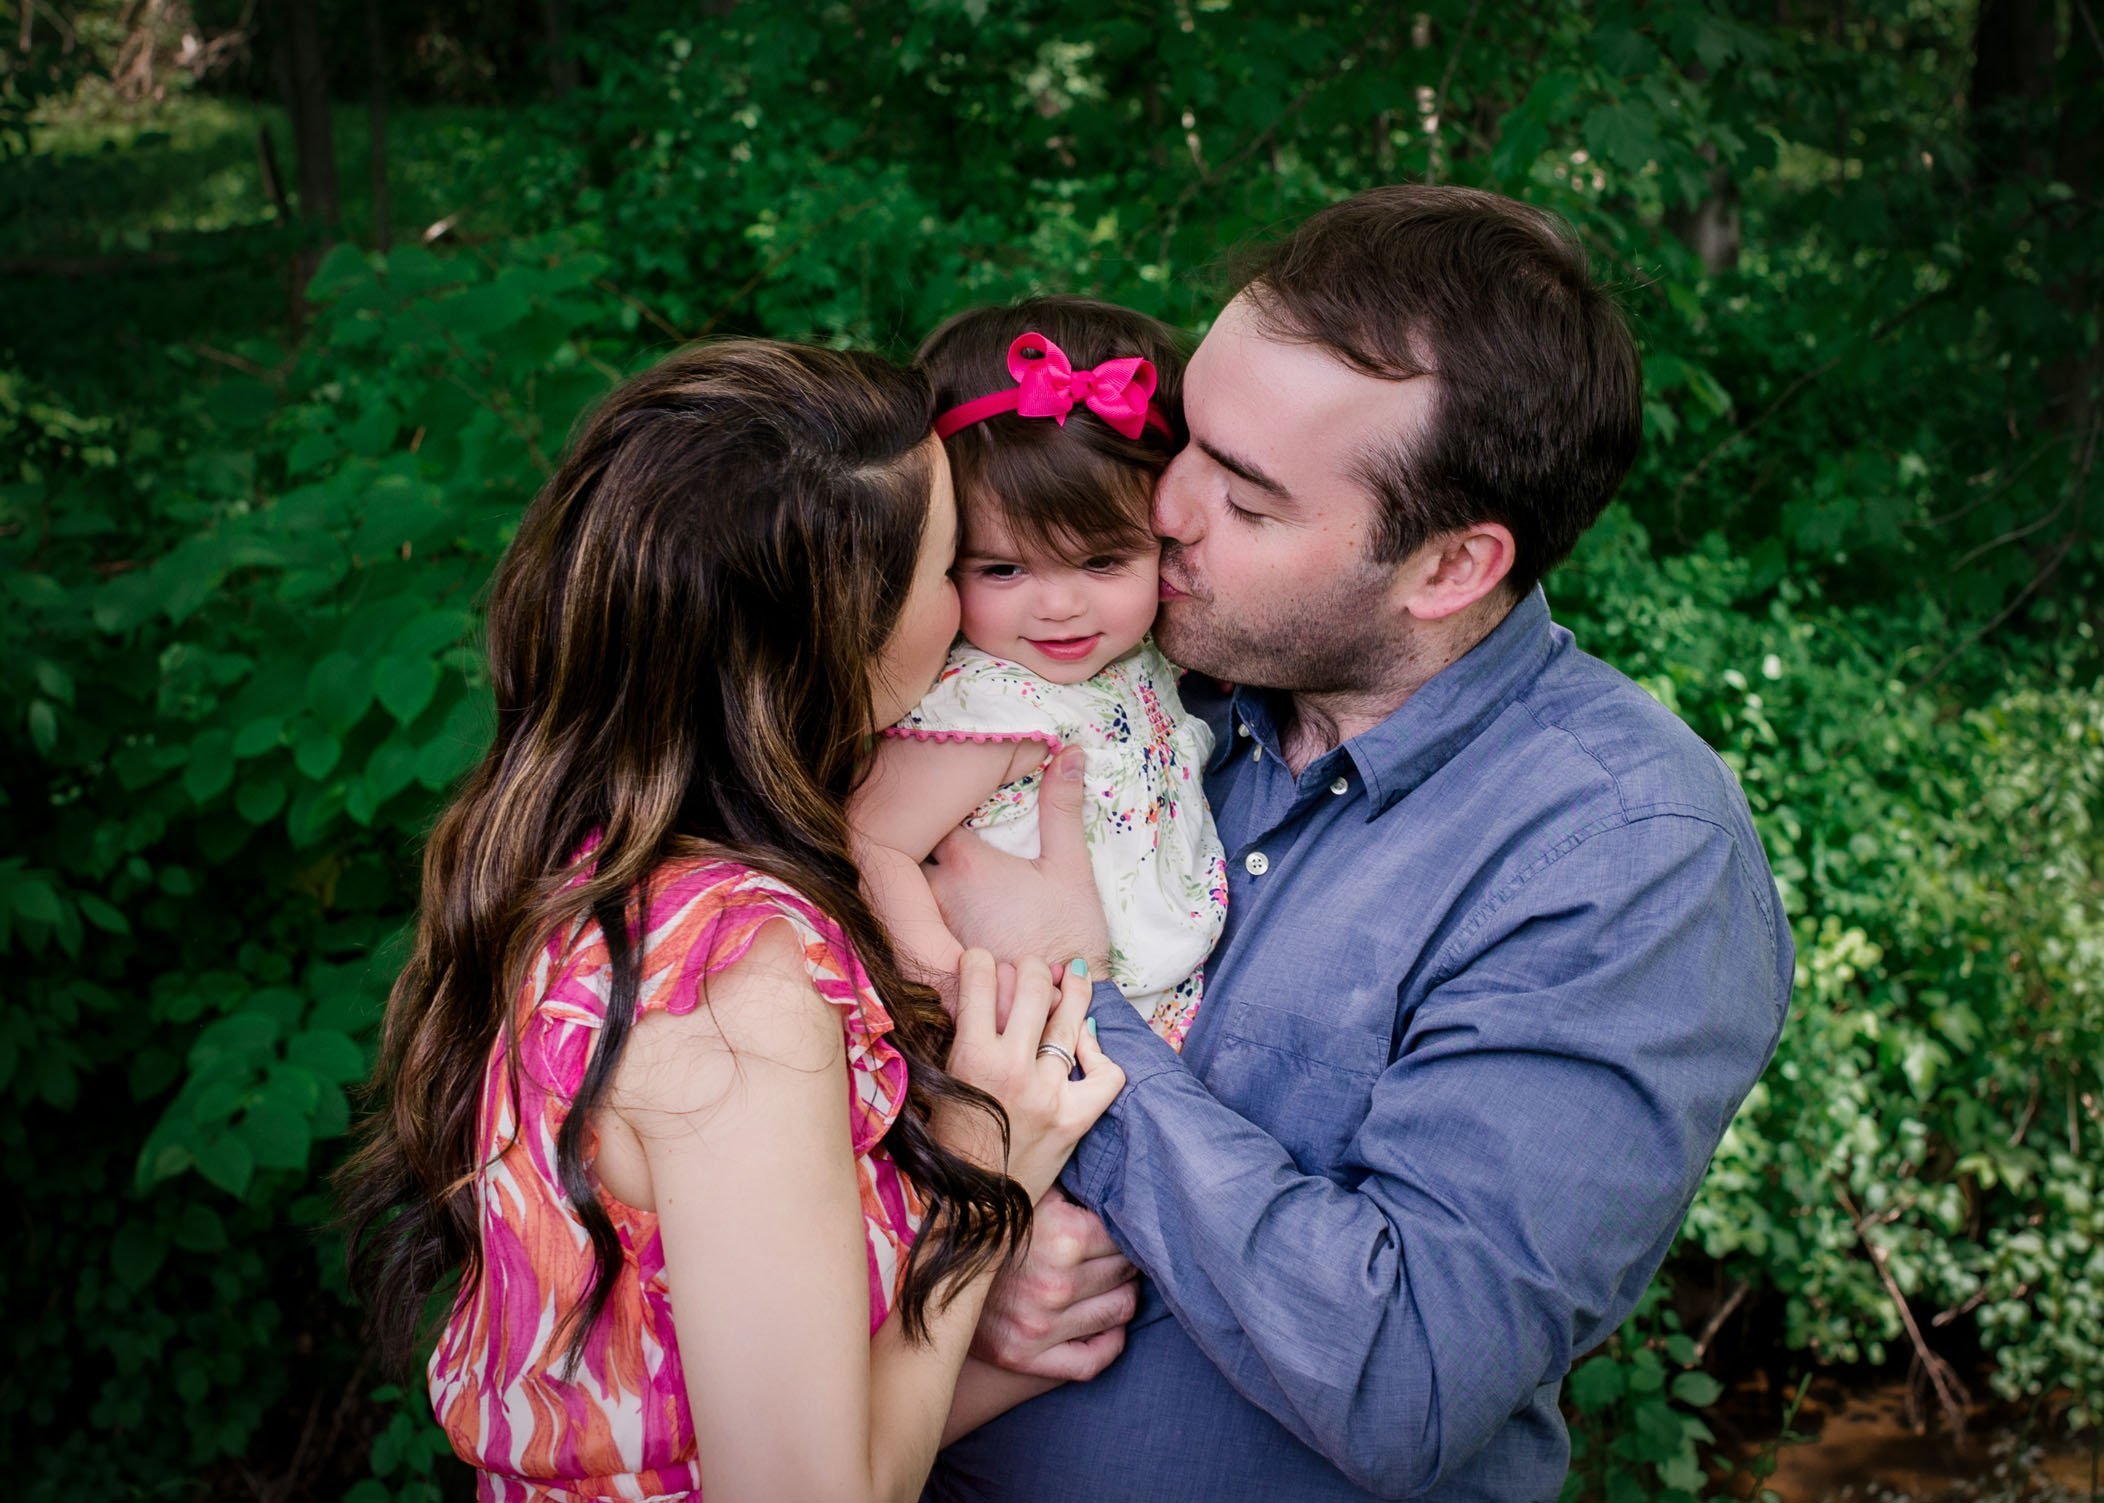 Mom and Dad kissing baby girl between them in the garden